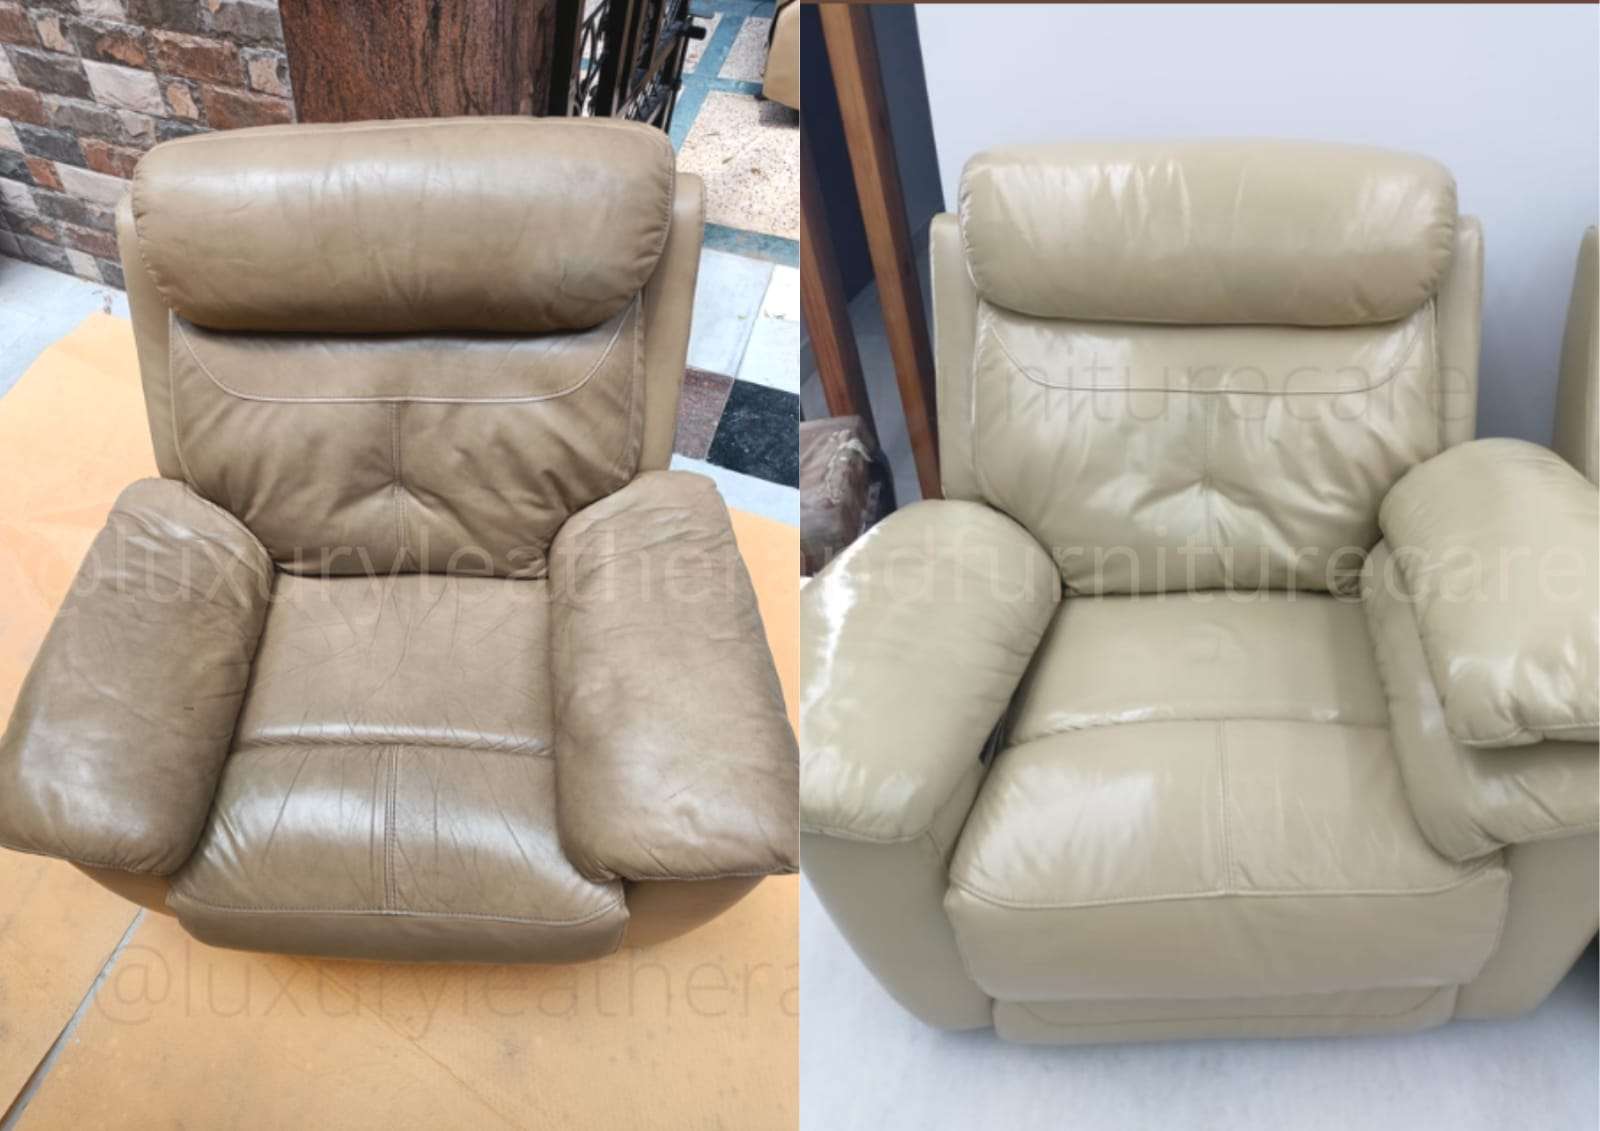 Single seater leather sofa cleaning